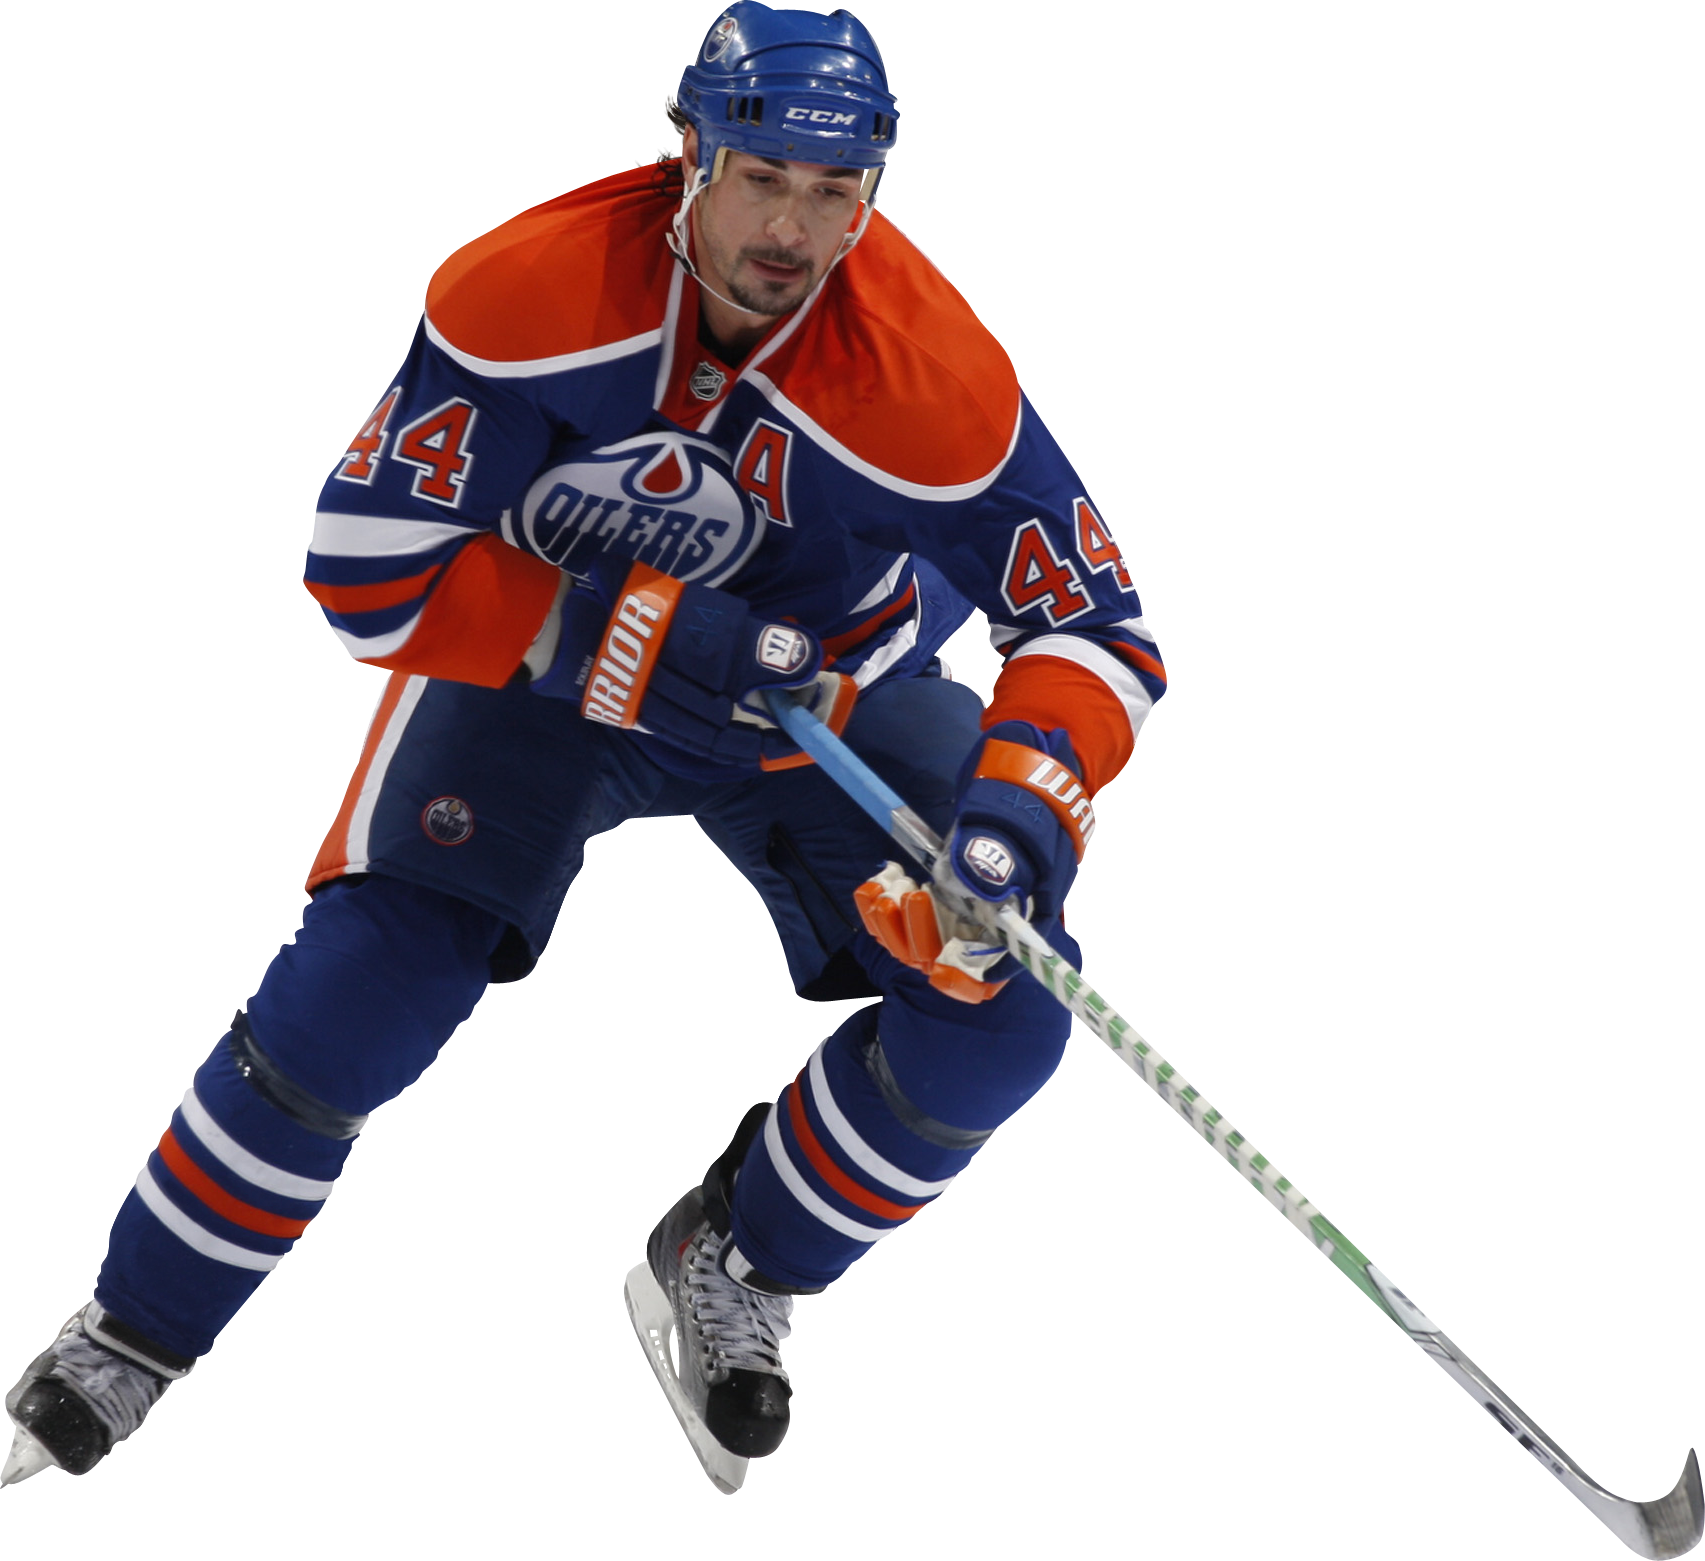 Player Hockey PNG Image